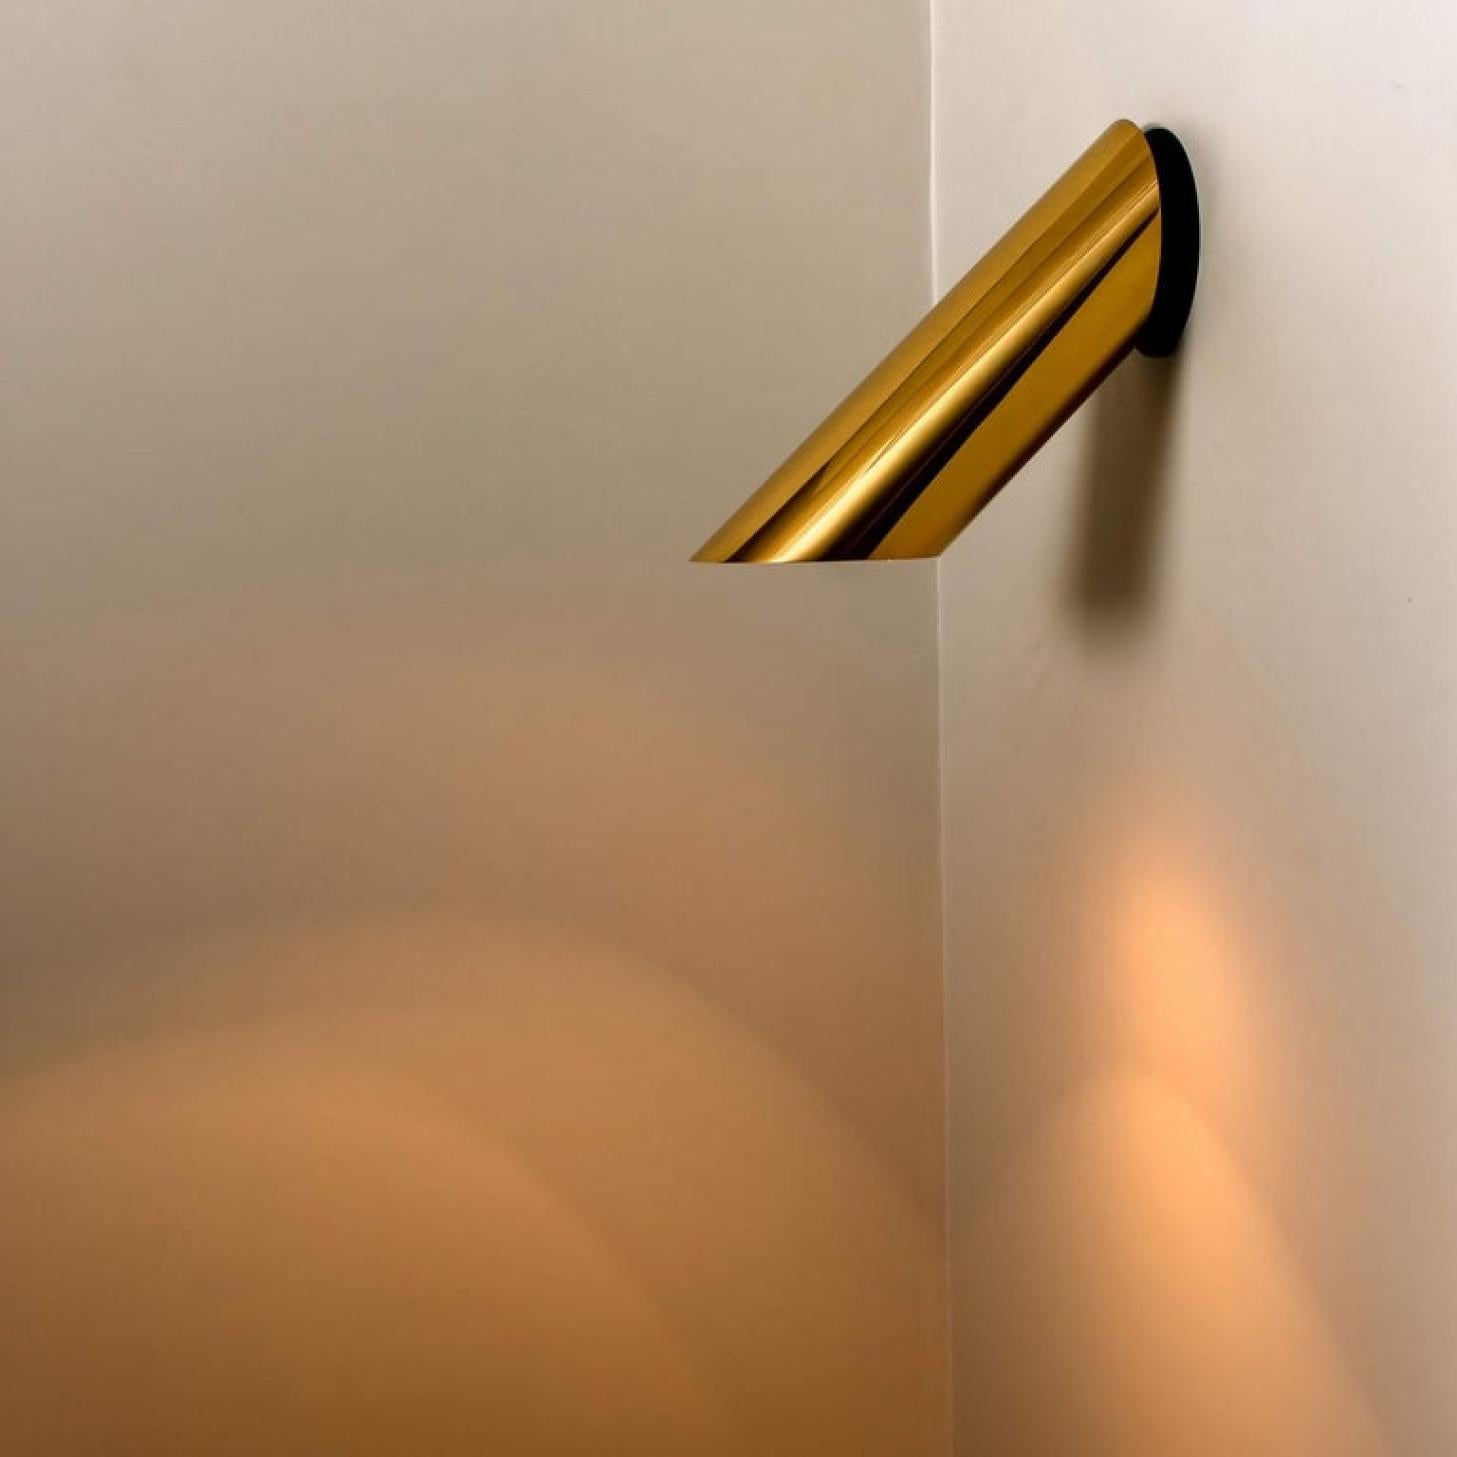 Late 20th Century 1 of the 6 Geometrical Brass Sconces by Nanda Vigo for Arredoluce, Italy, 1970 For Sale